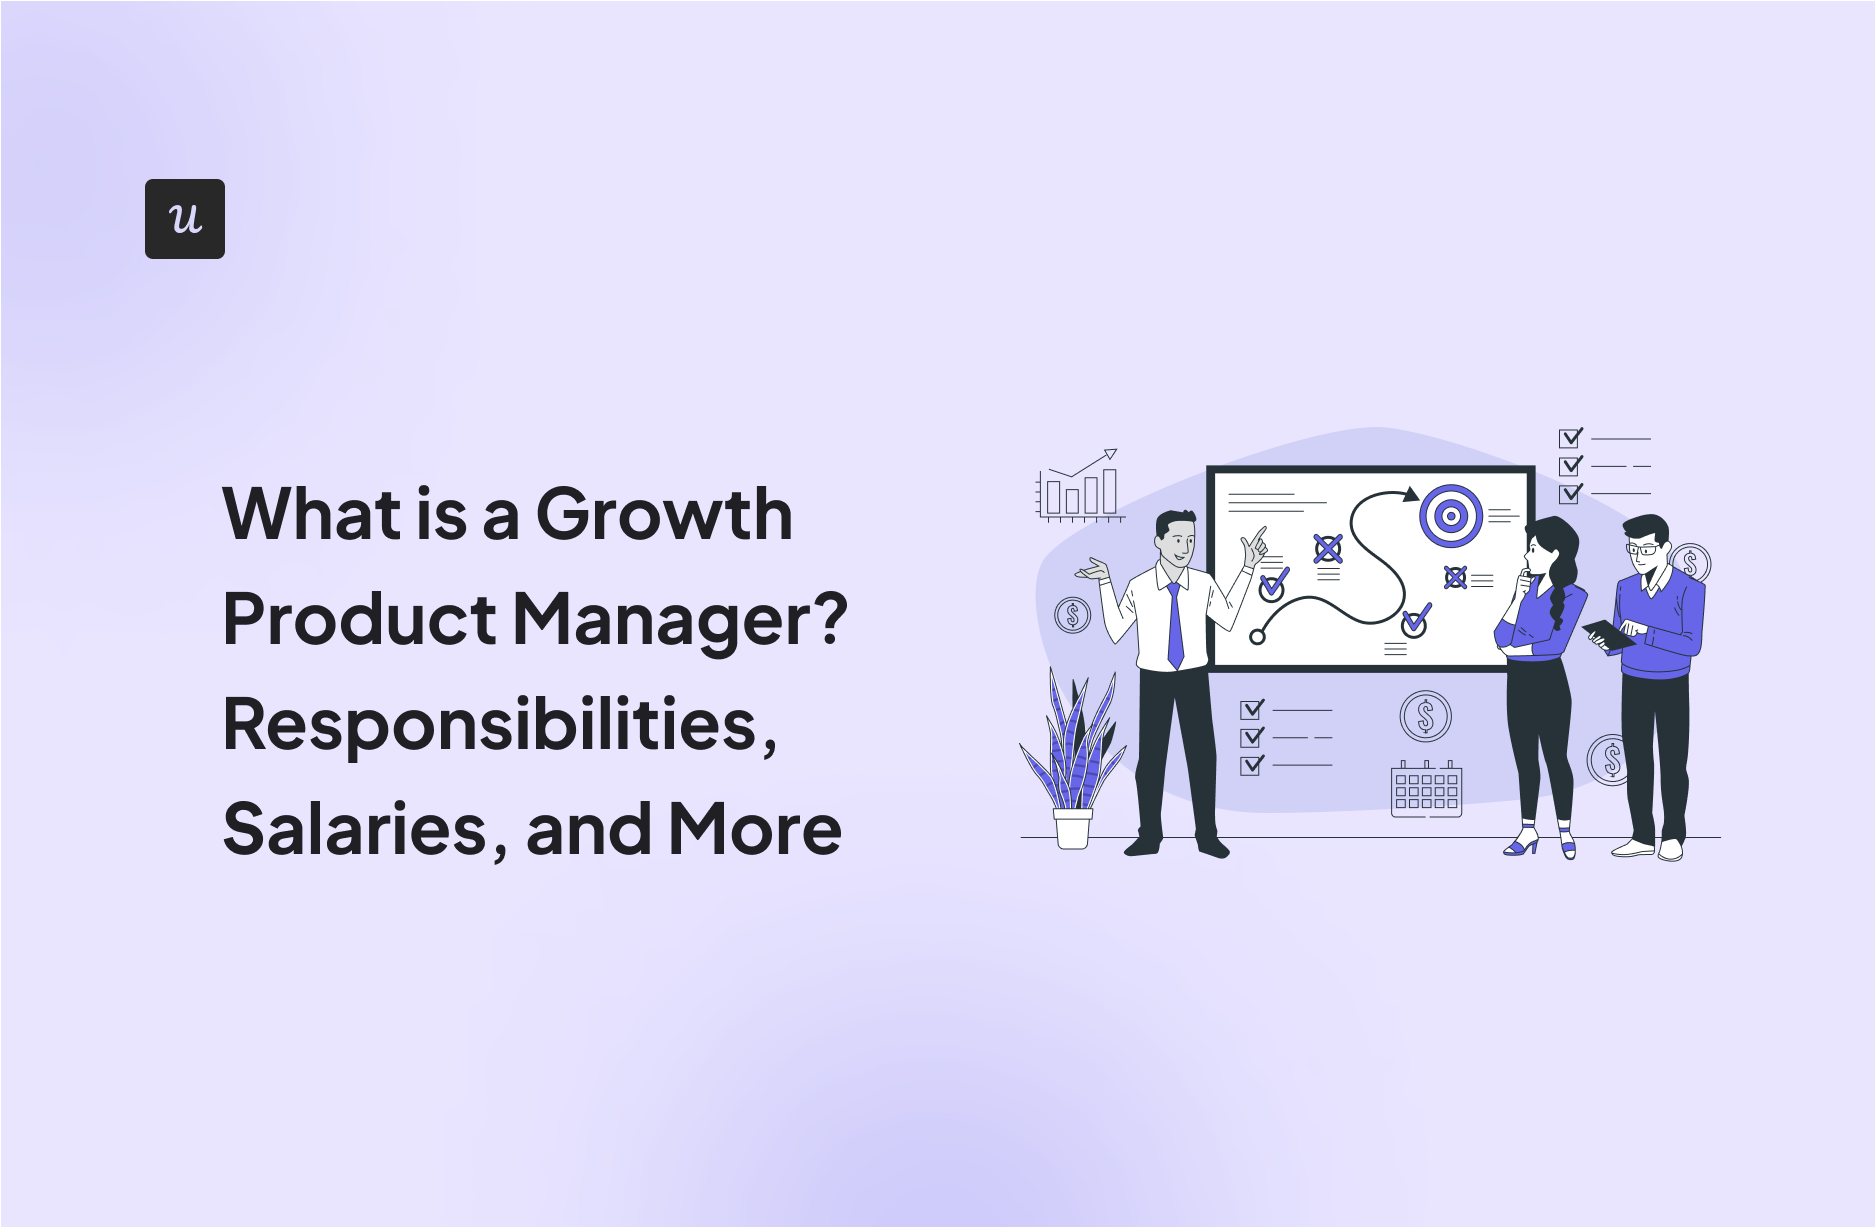 What is a Growth Product Manager? Responsibilities, Salaries, and More